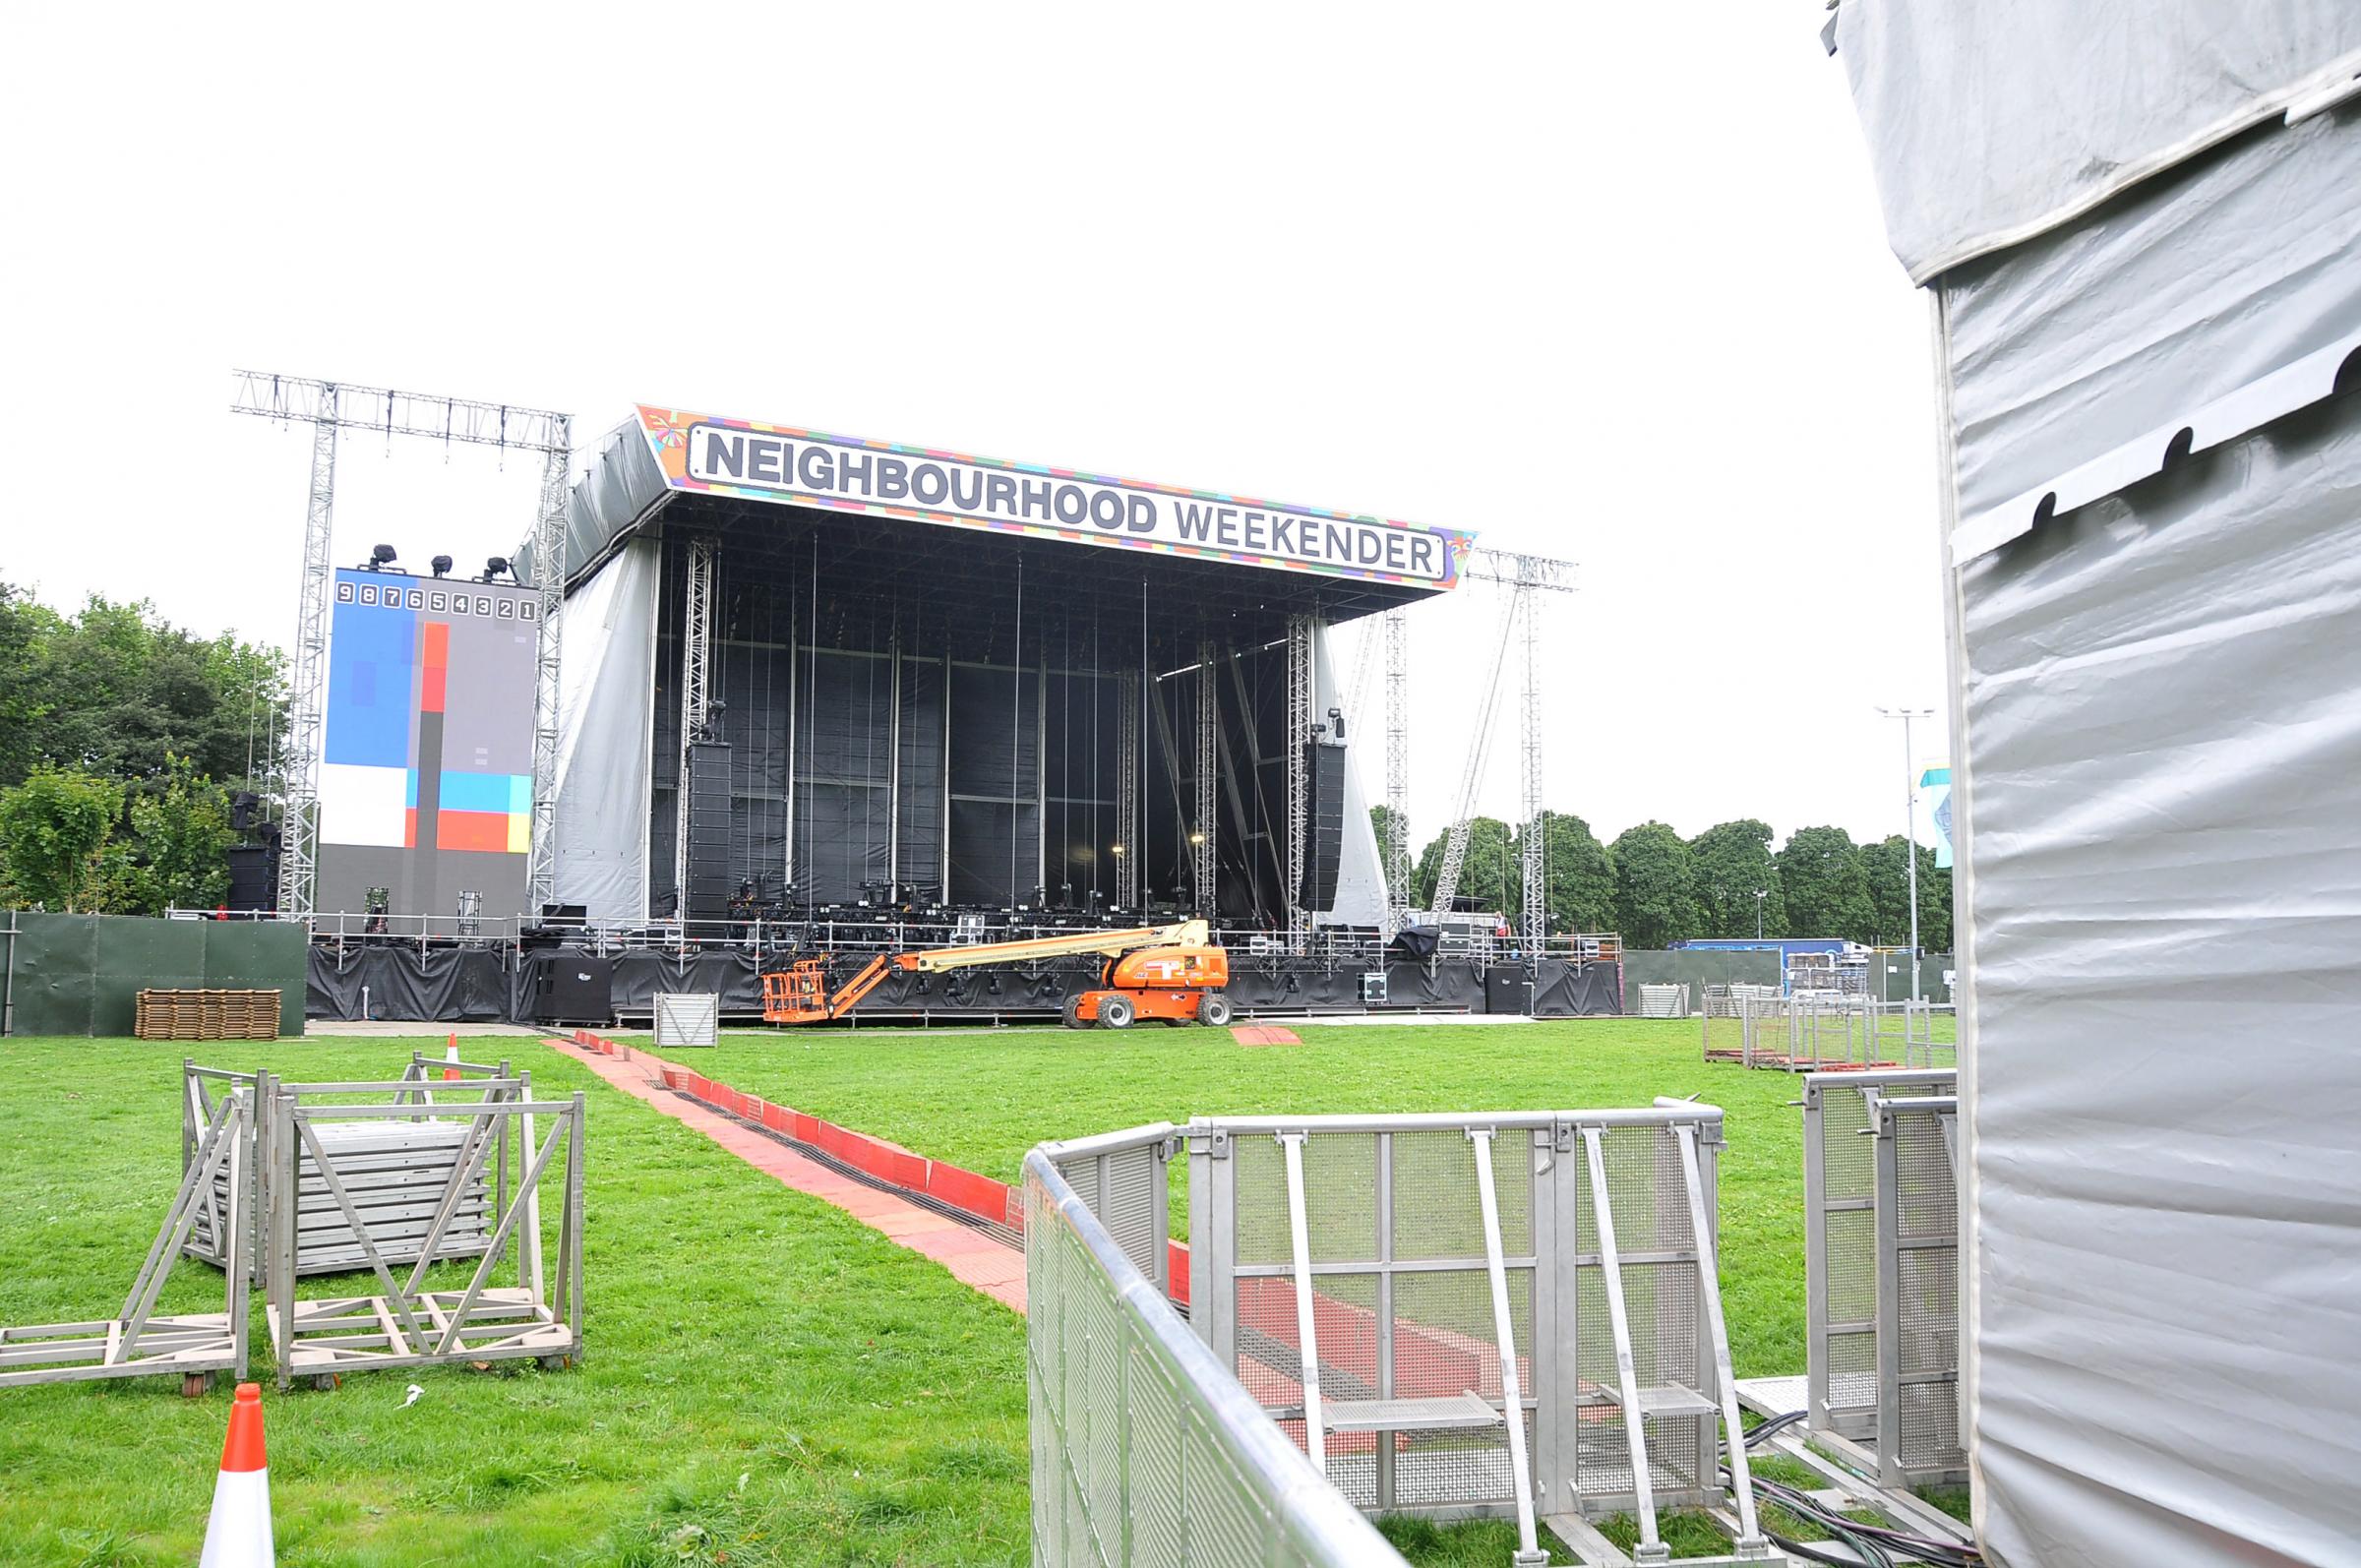 Victoria Parks transformation into the Neighbourhood Weekender site